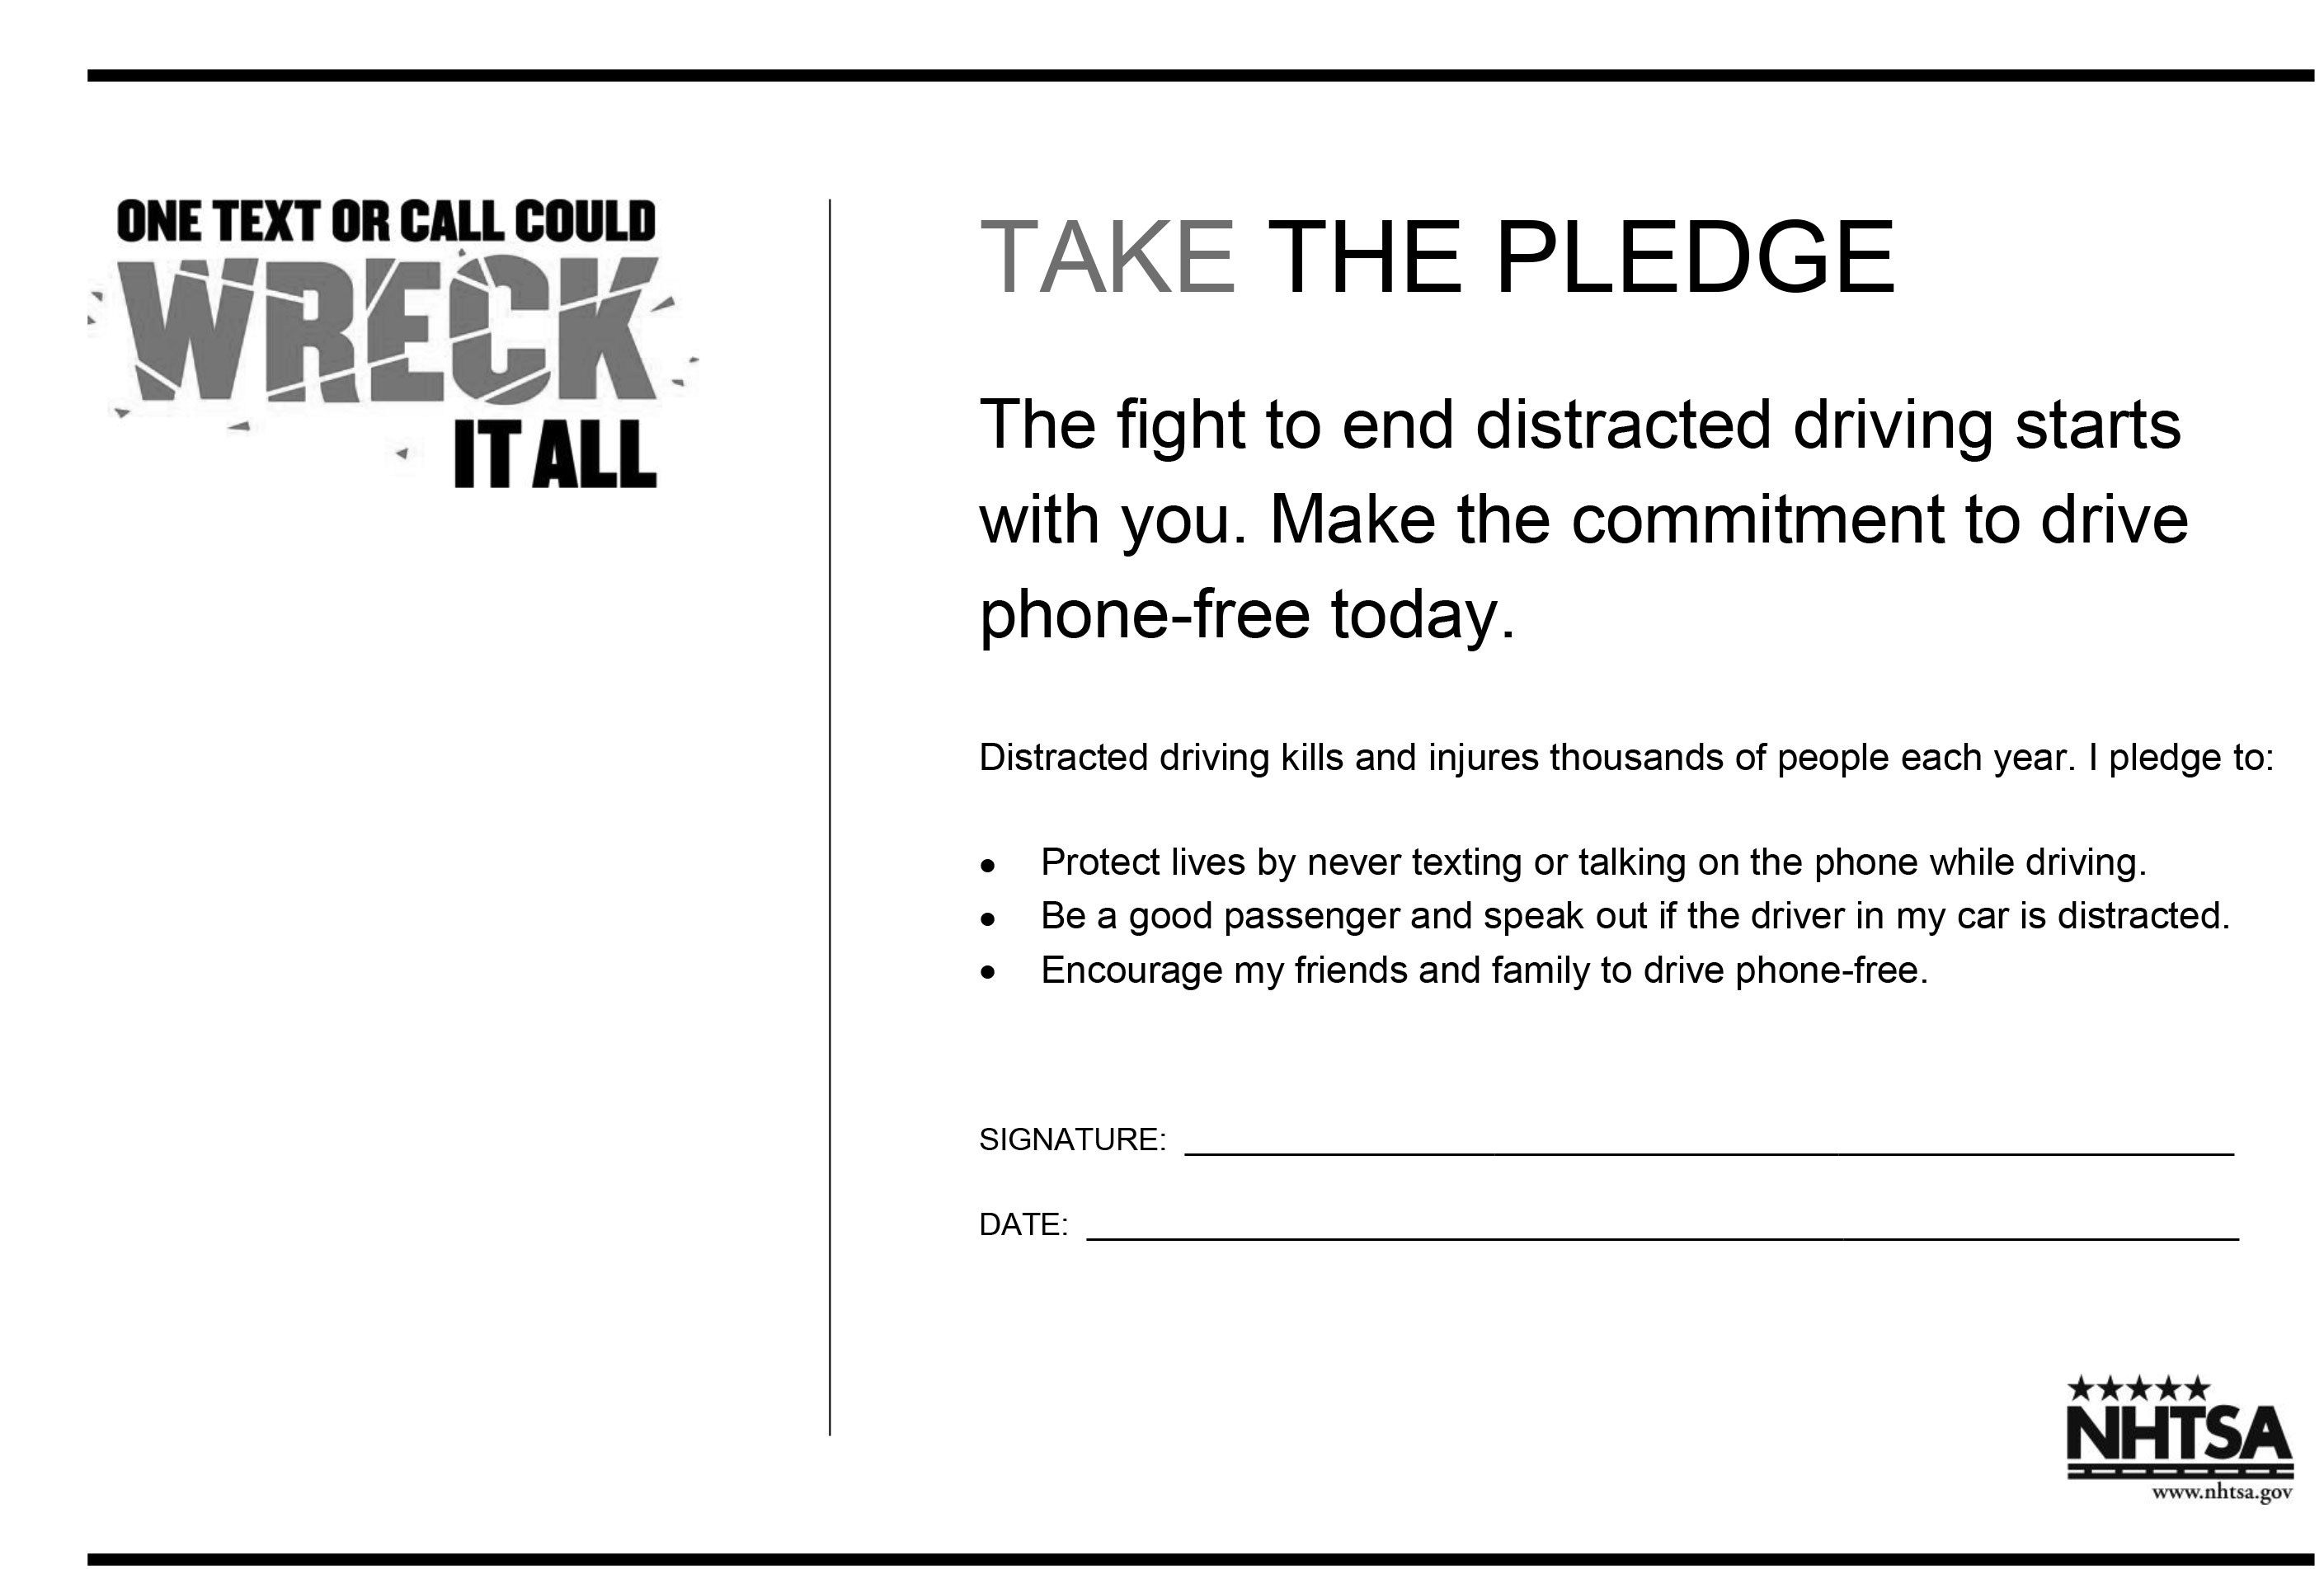 NHTSA Distracted driving: One Text or Call could Wreck it All pledge cards